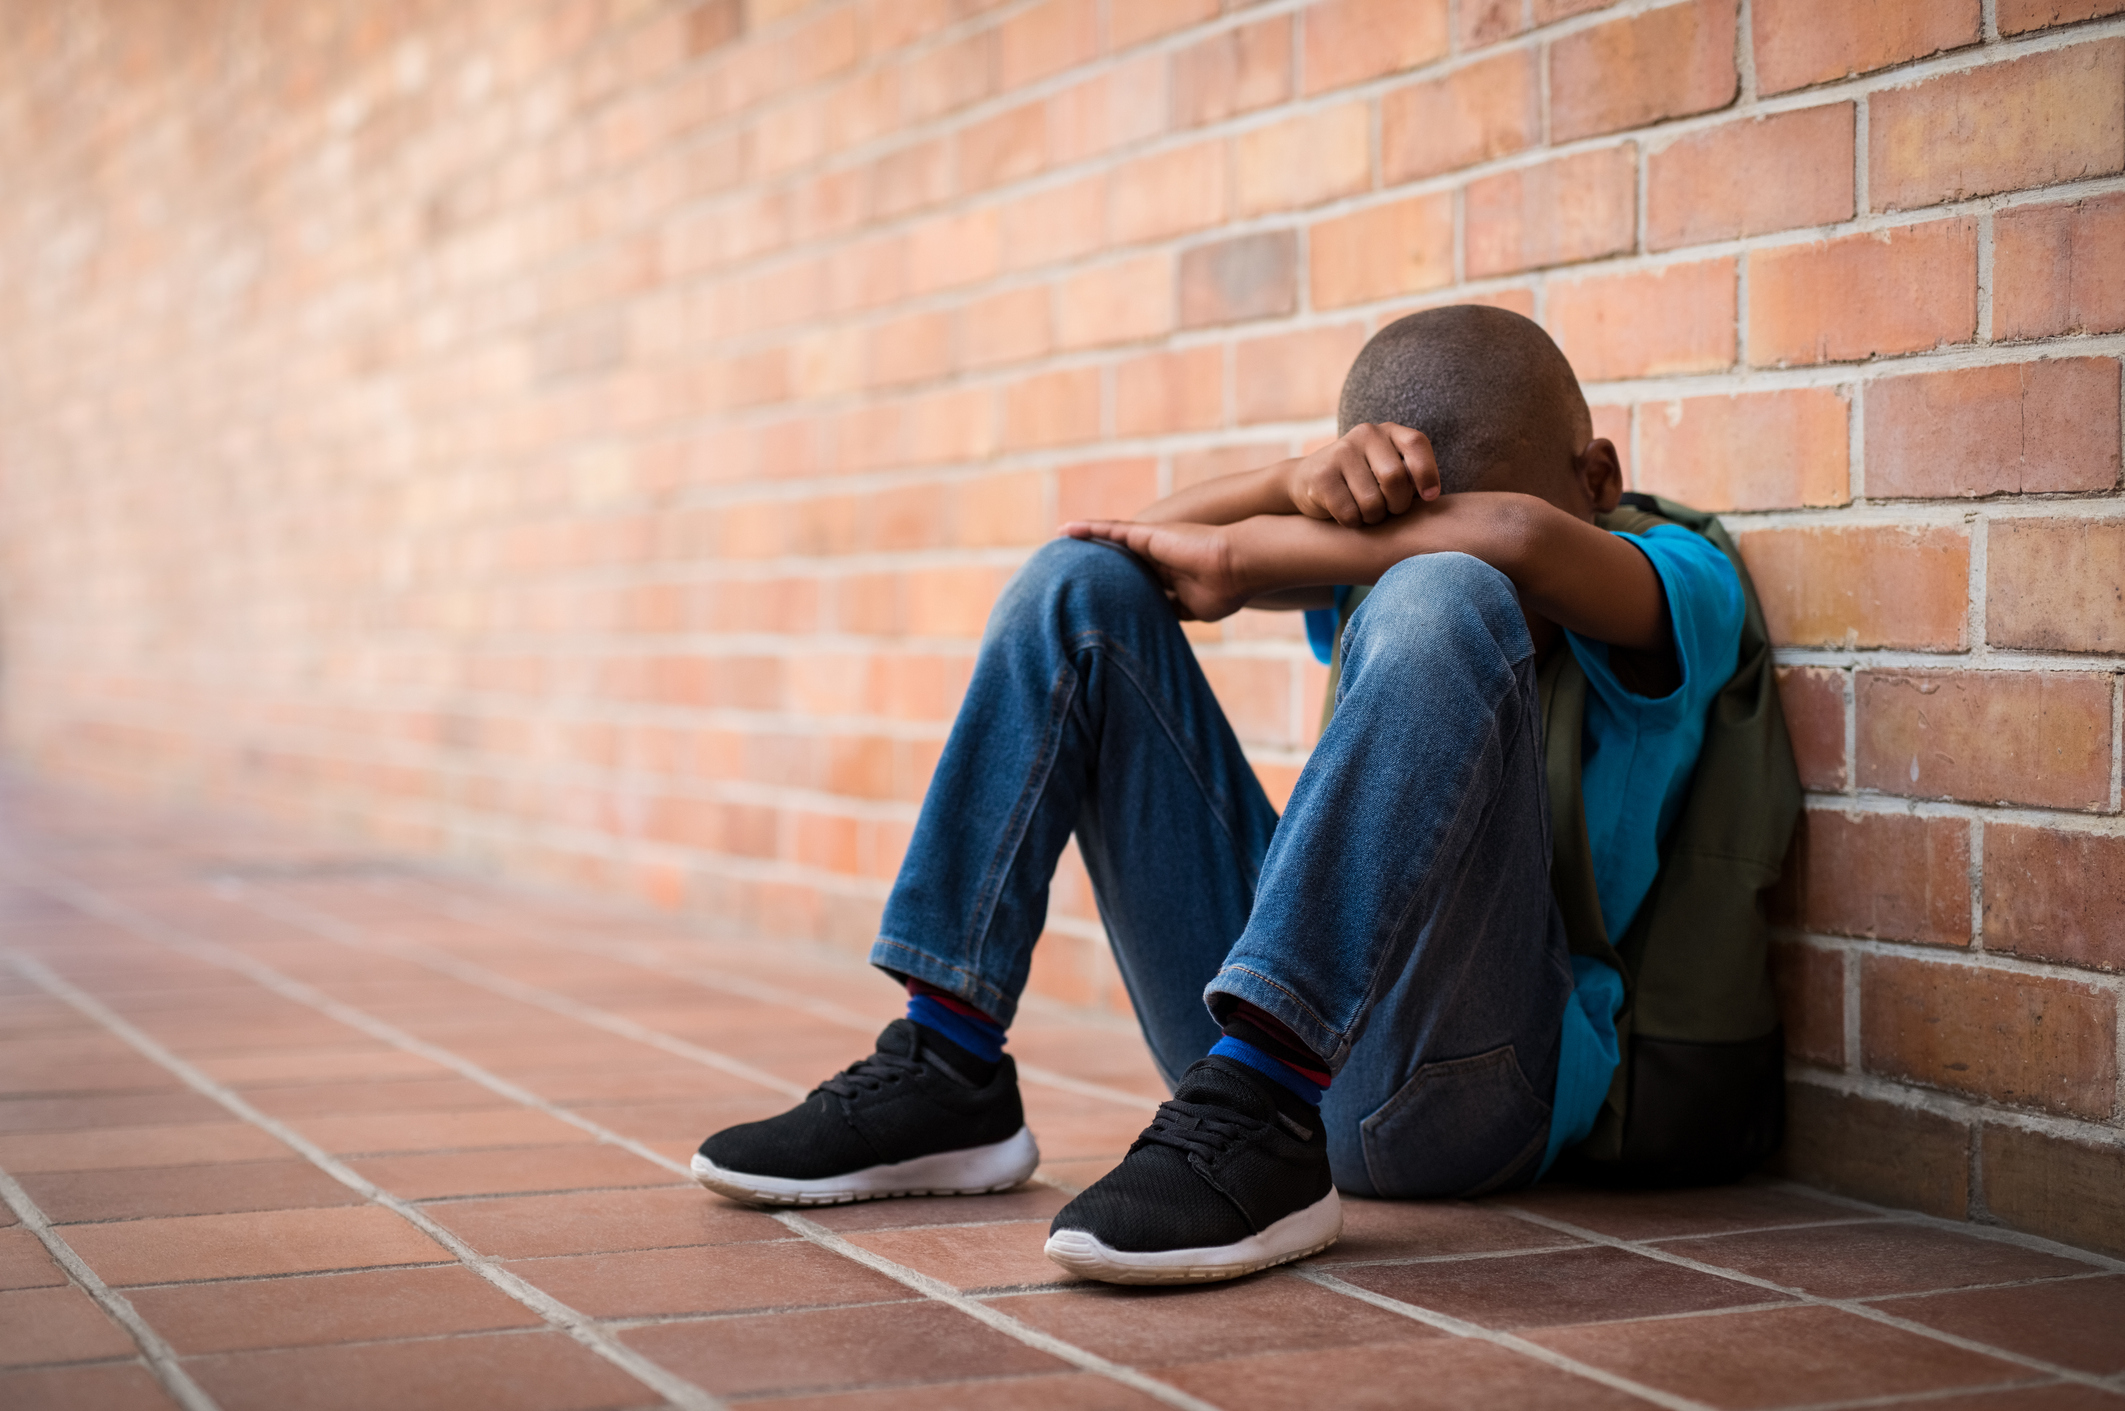 How Bullying May Shape Adolescent Brains